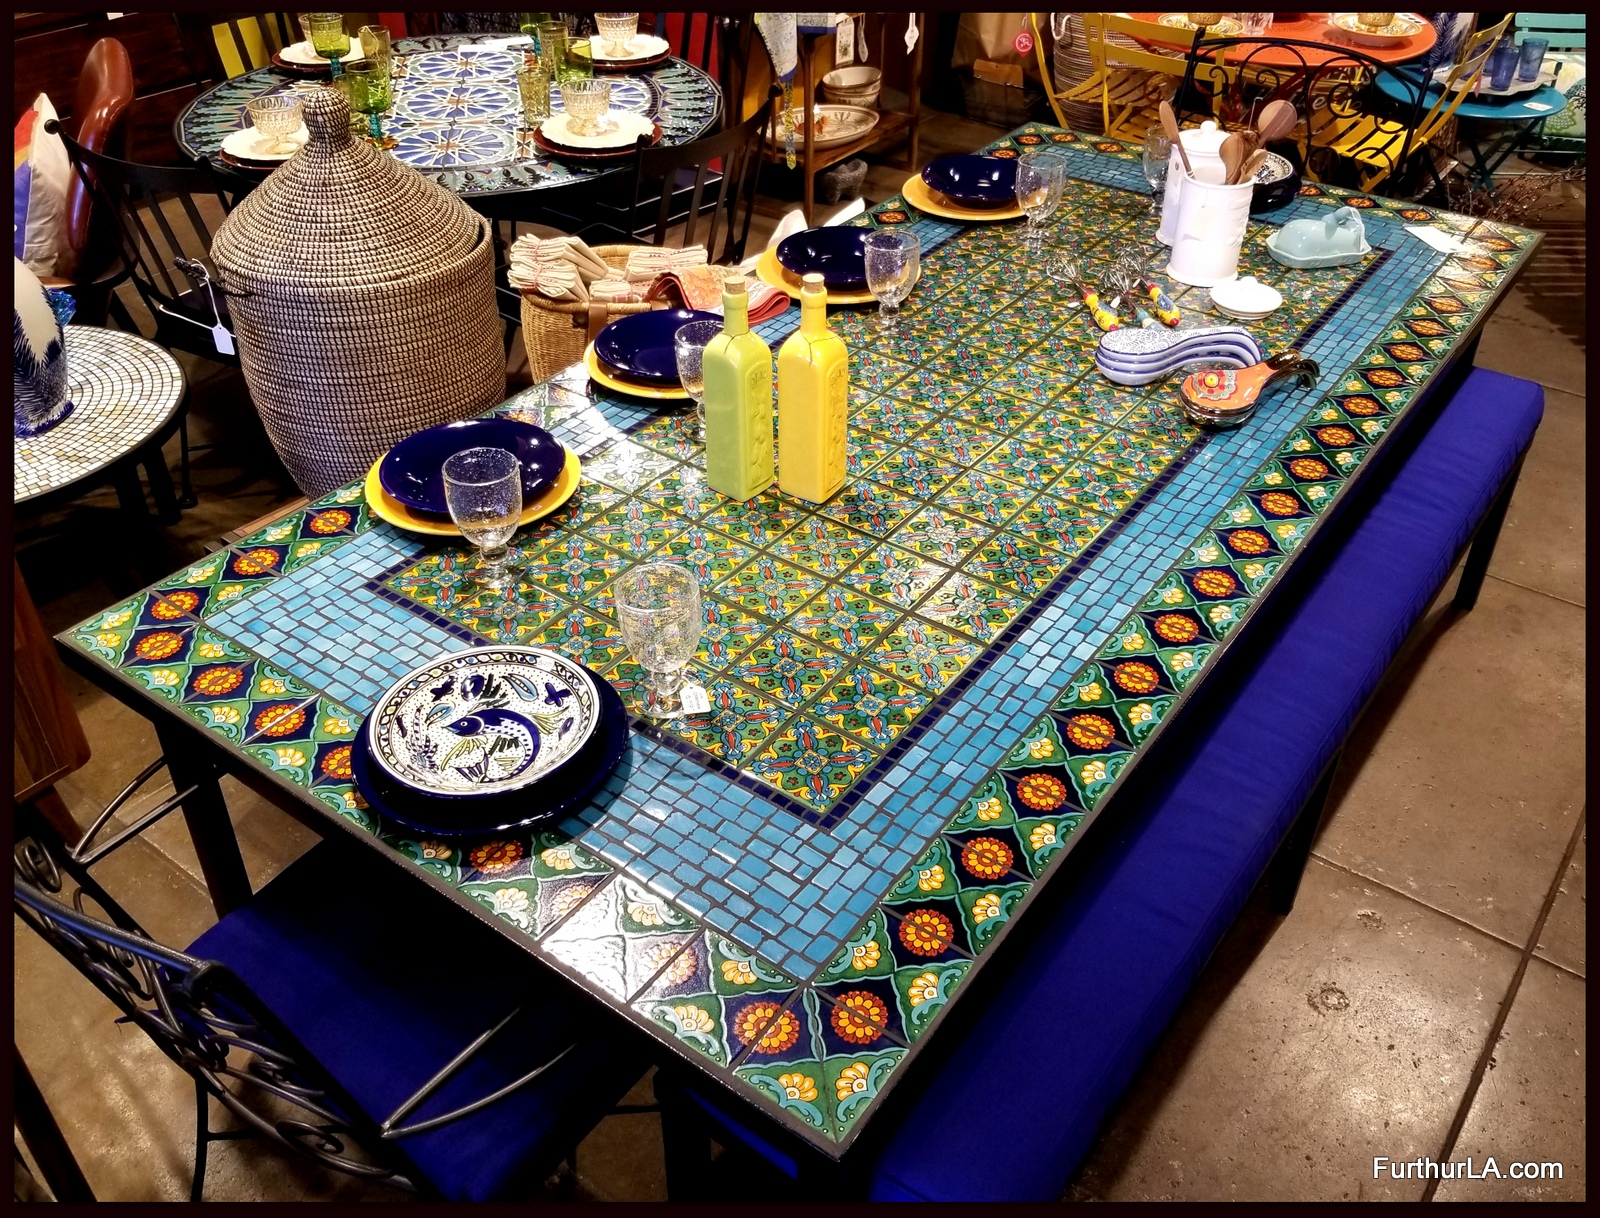 Furthur Whole Mosaic Dining Tables, Tile Dining Table Outdoor